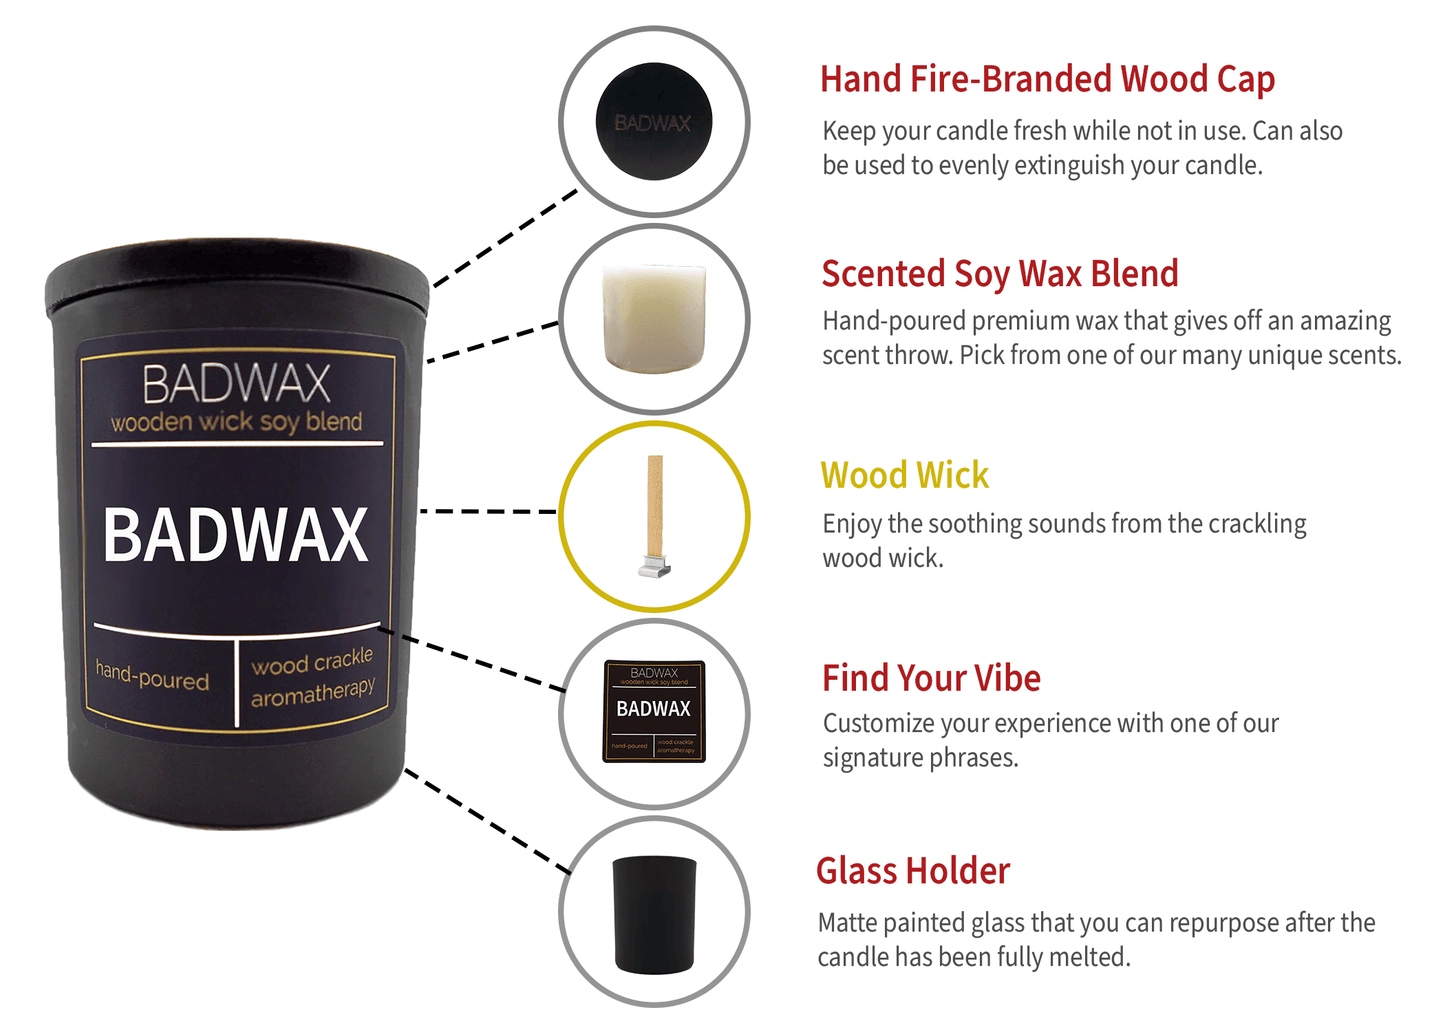 Let’s Get Litty - Woodwick Candle - BADWAX